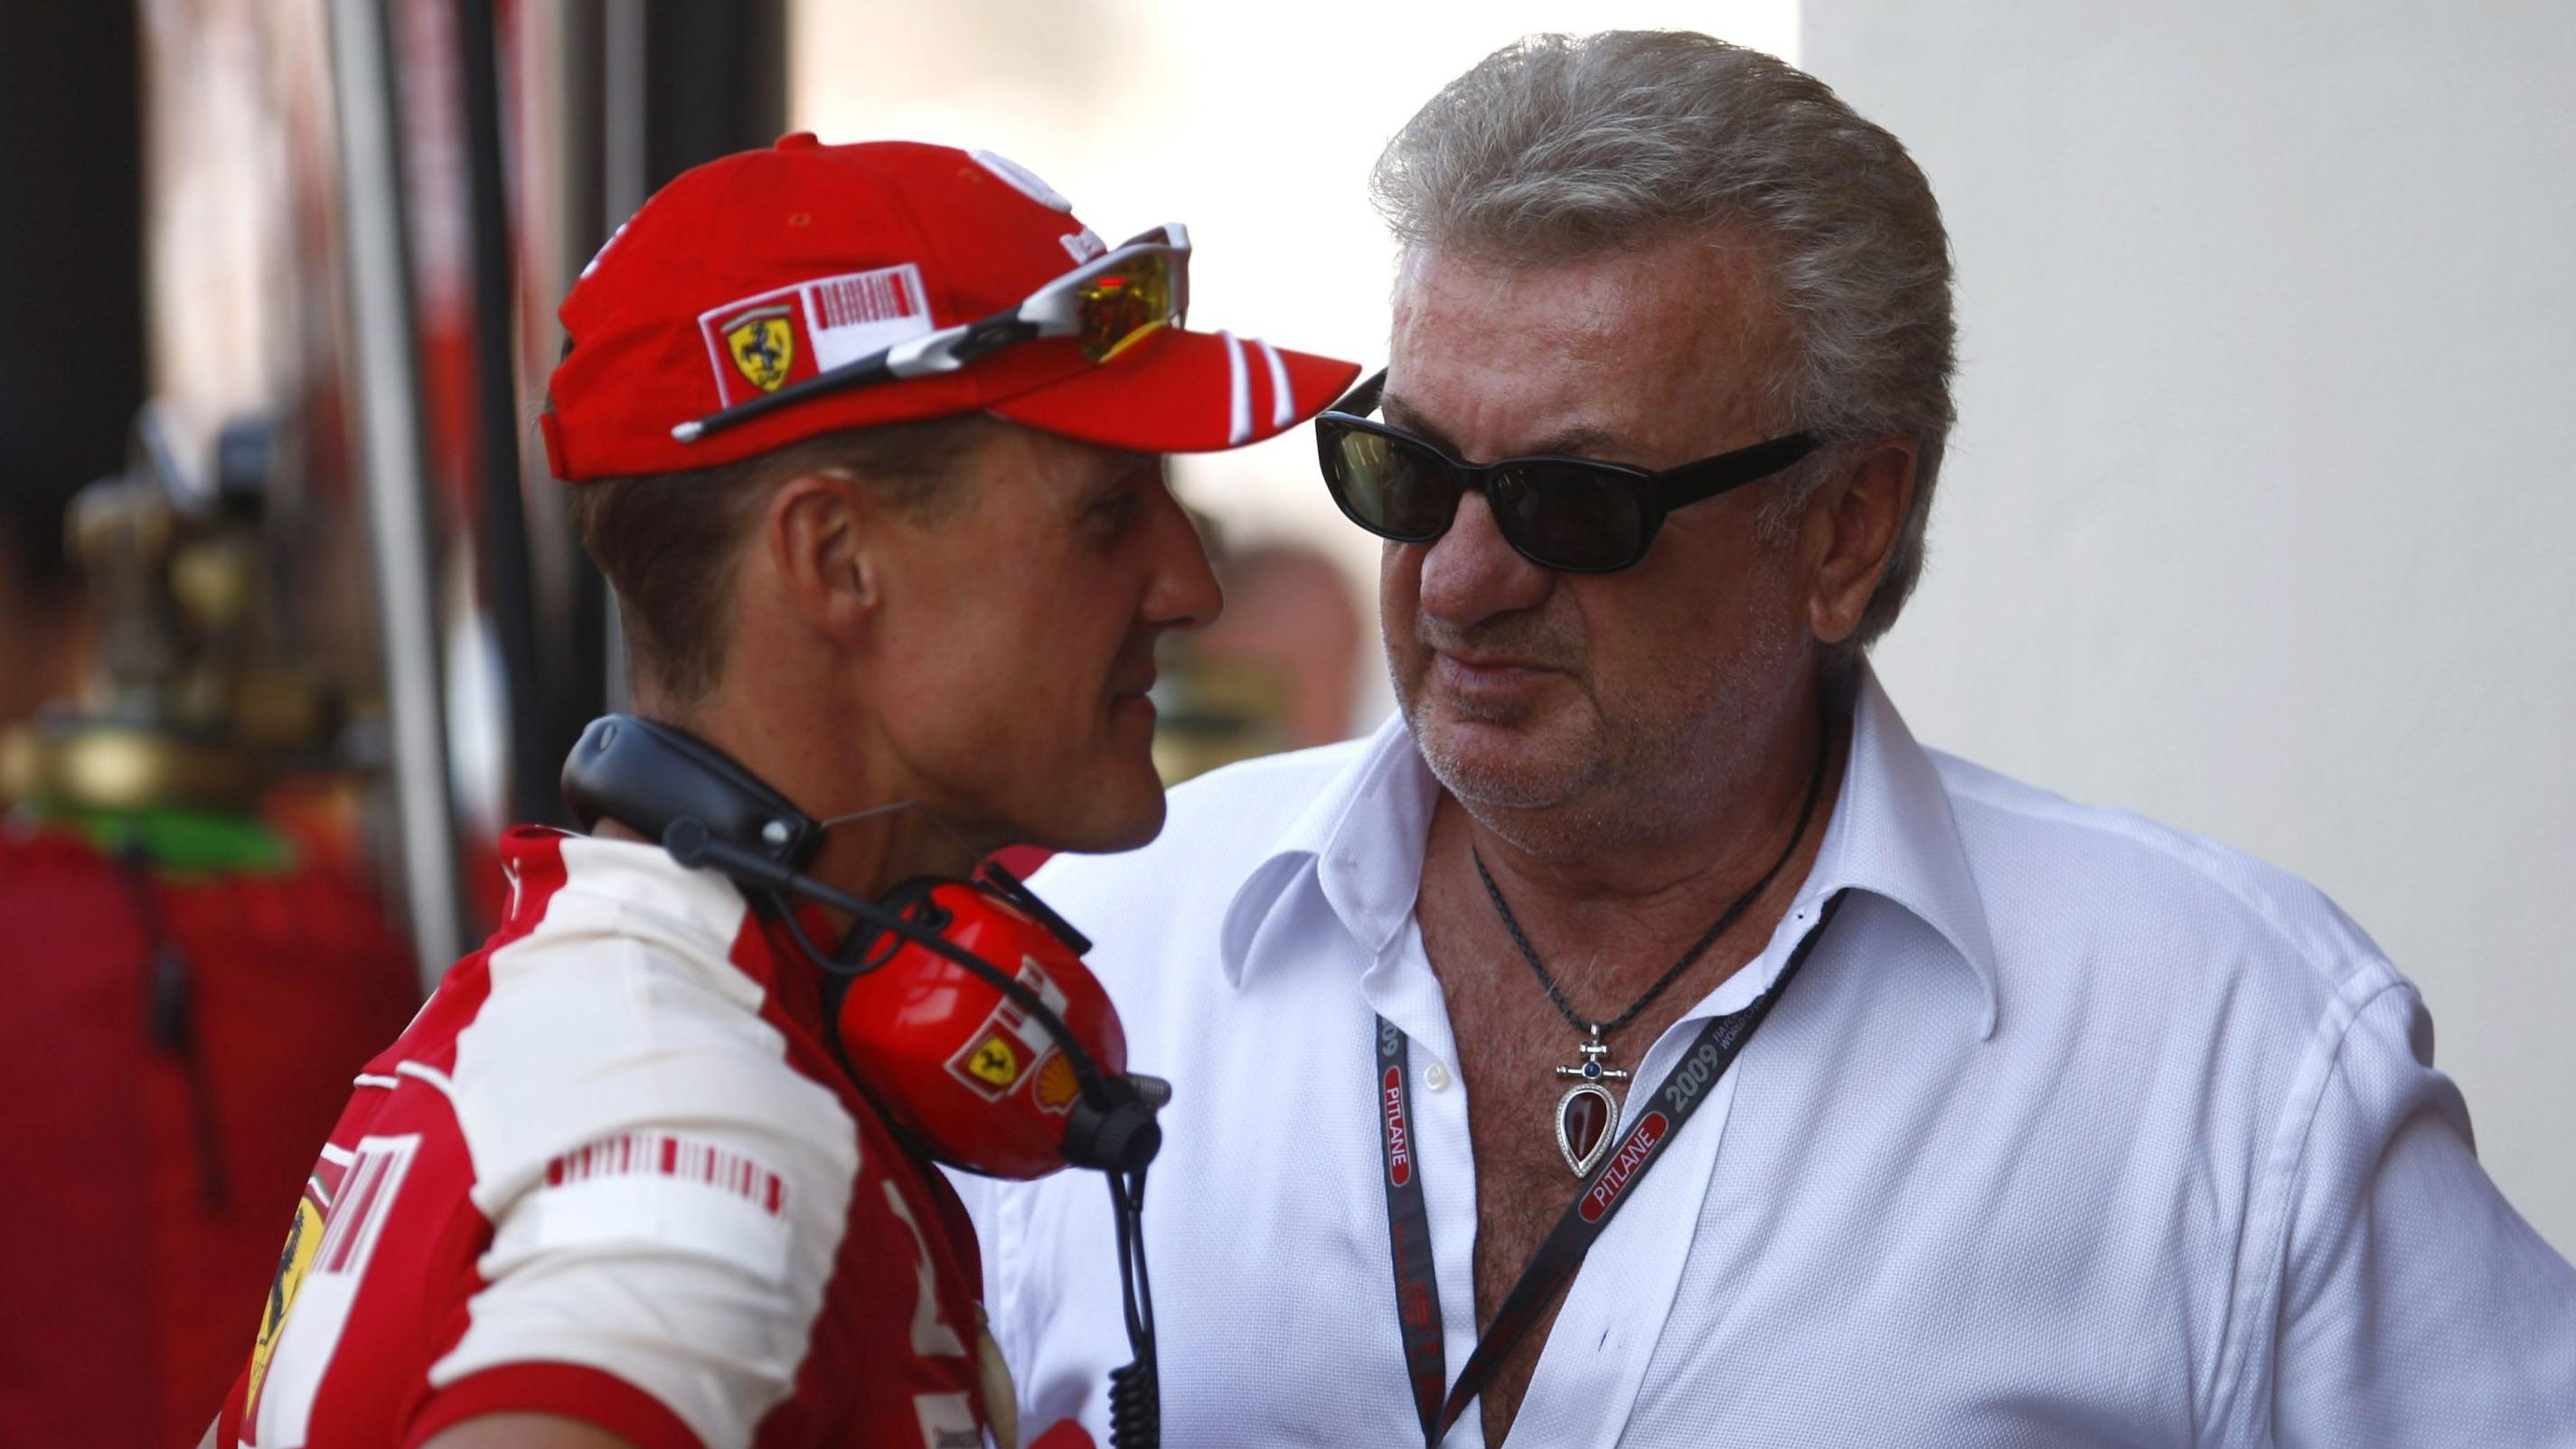 Formula 1: Michael Schumacher's former agent has "no hope of seeing him again"